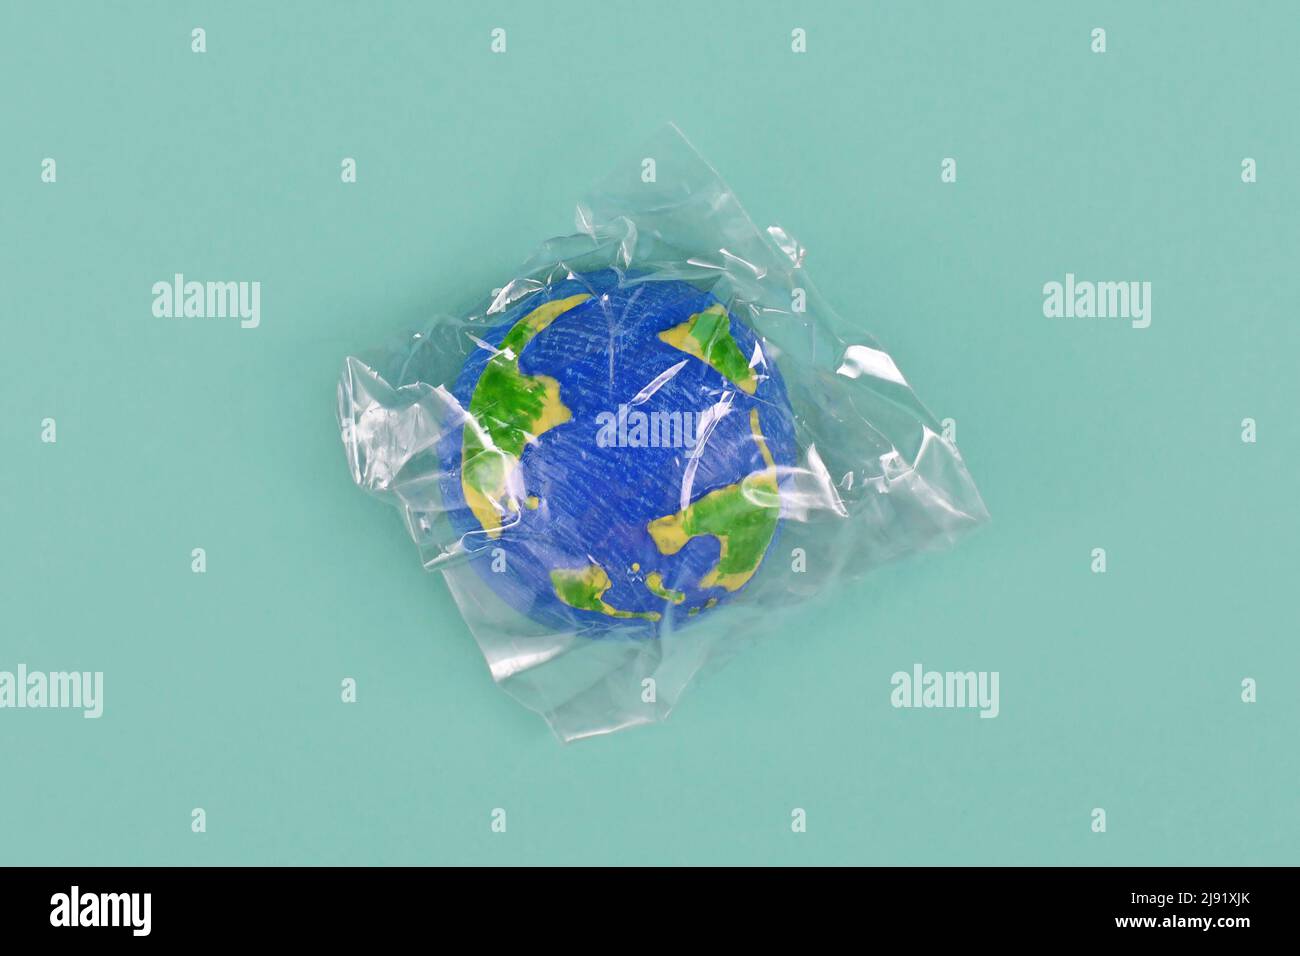 Planet earth model wrapped in plastic Stock Photo